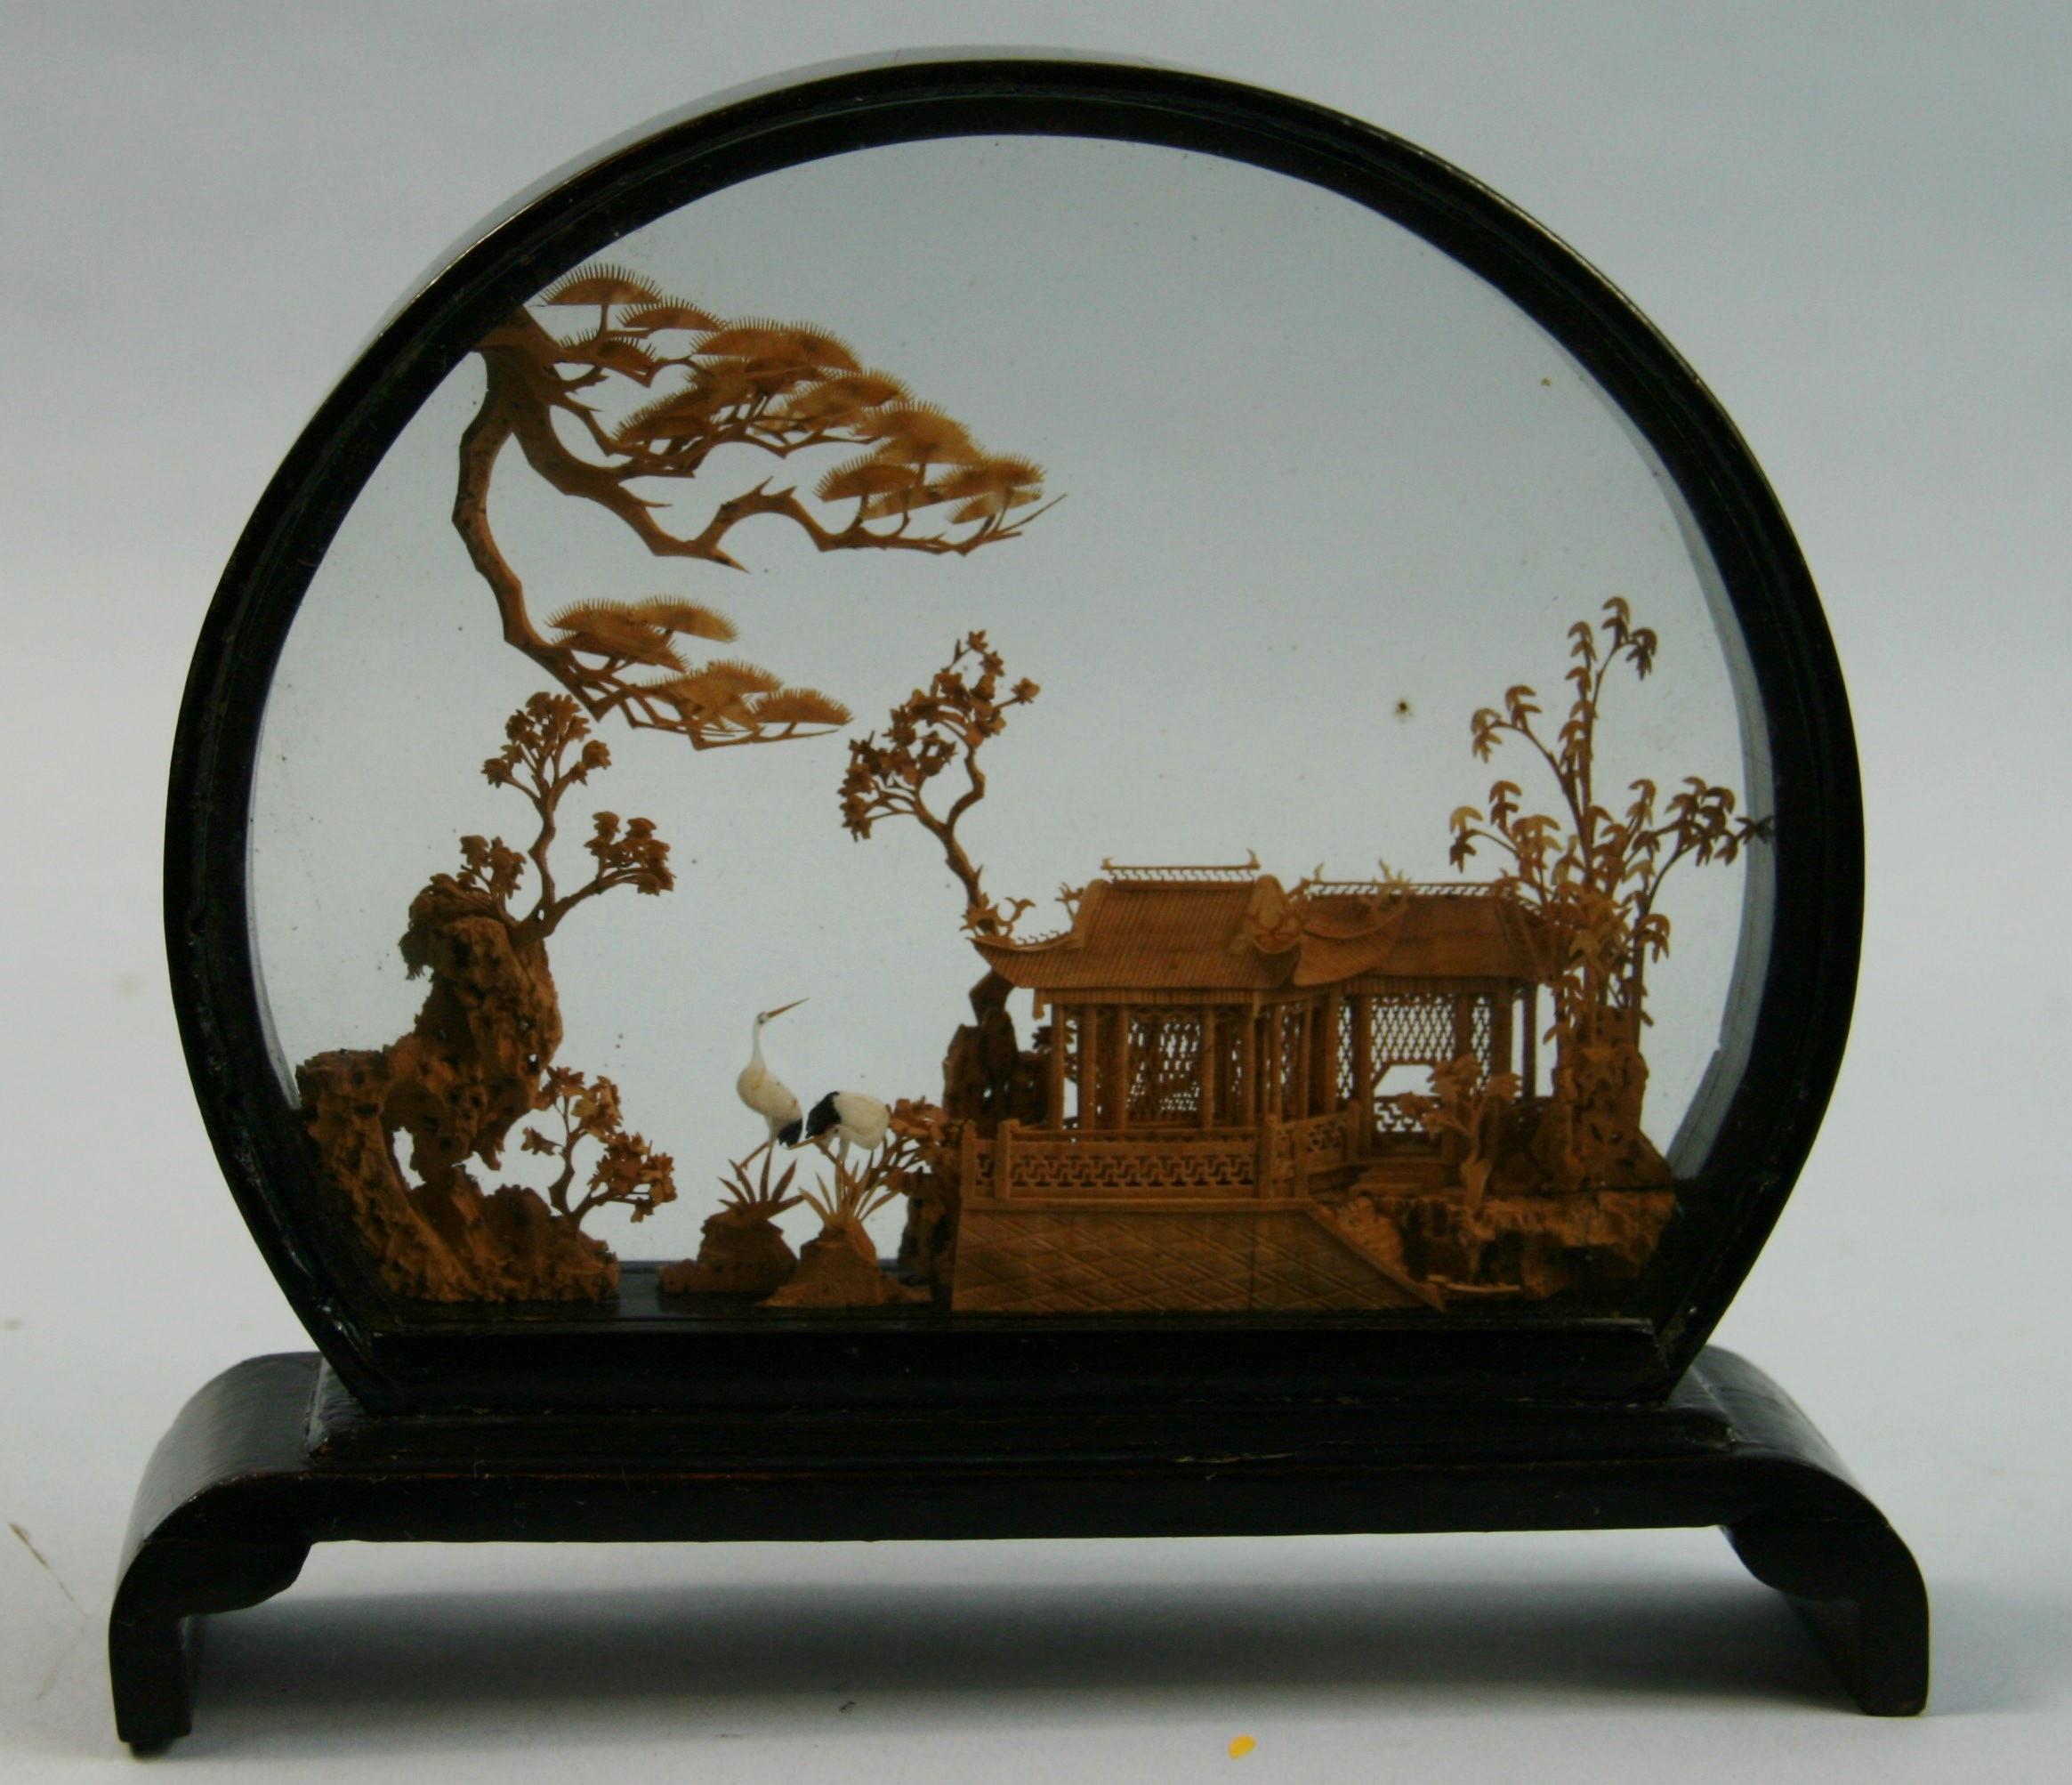 3-716 Chinese diorama made of vintage glass and lacquered wood.
Careful delicate work of miniature sculpture representing a Chinese landscape view, a pagoda in a traditional garden surrounded by conifers, bamboo racks and craines.